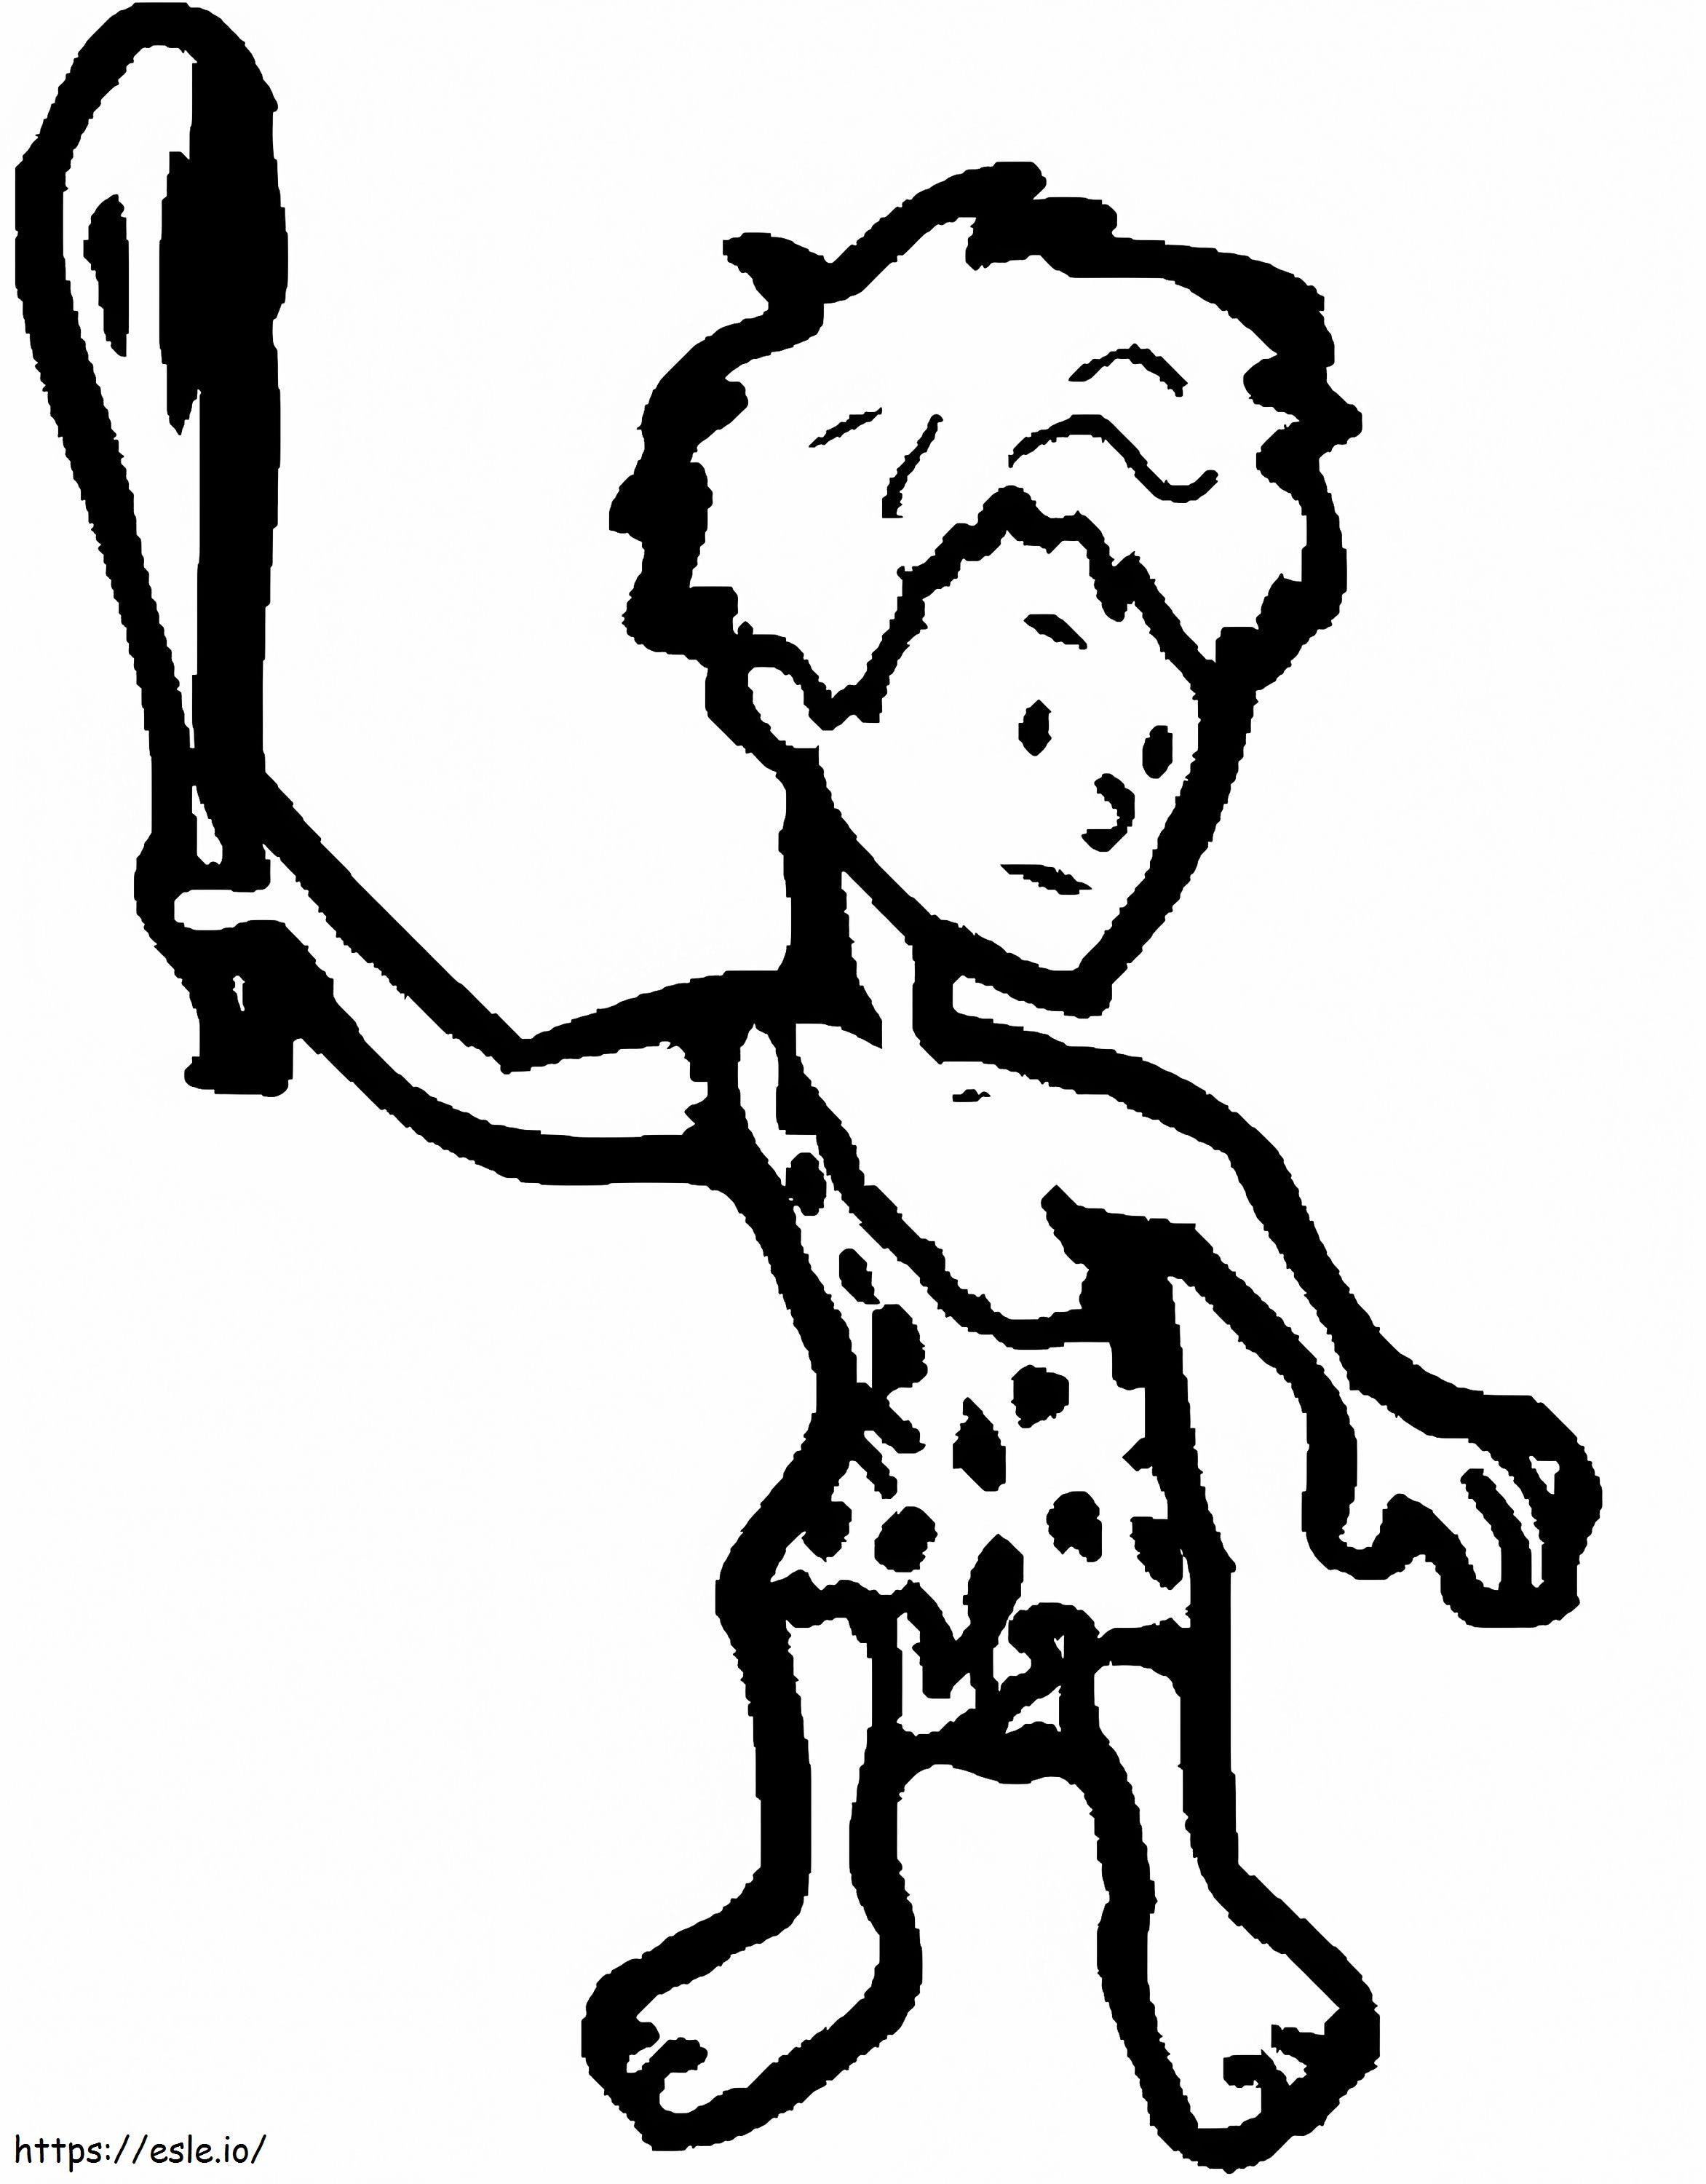 1529118930 Costume Caveman 1460091675 coloring page